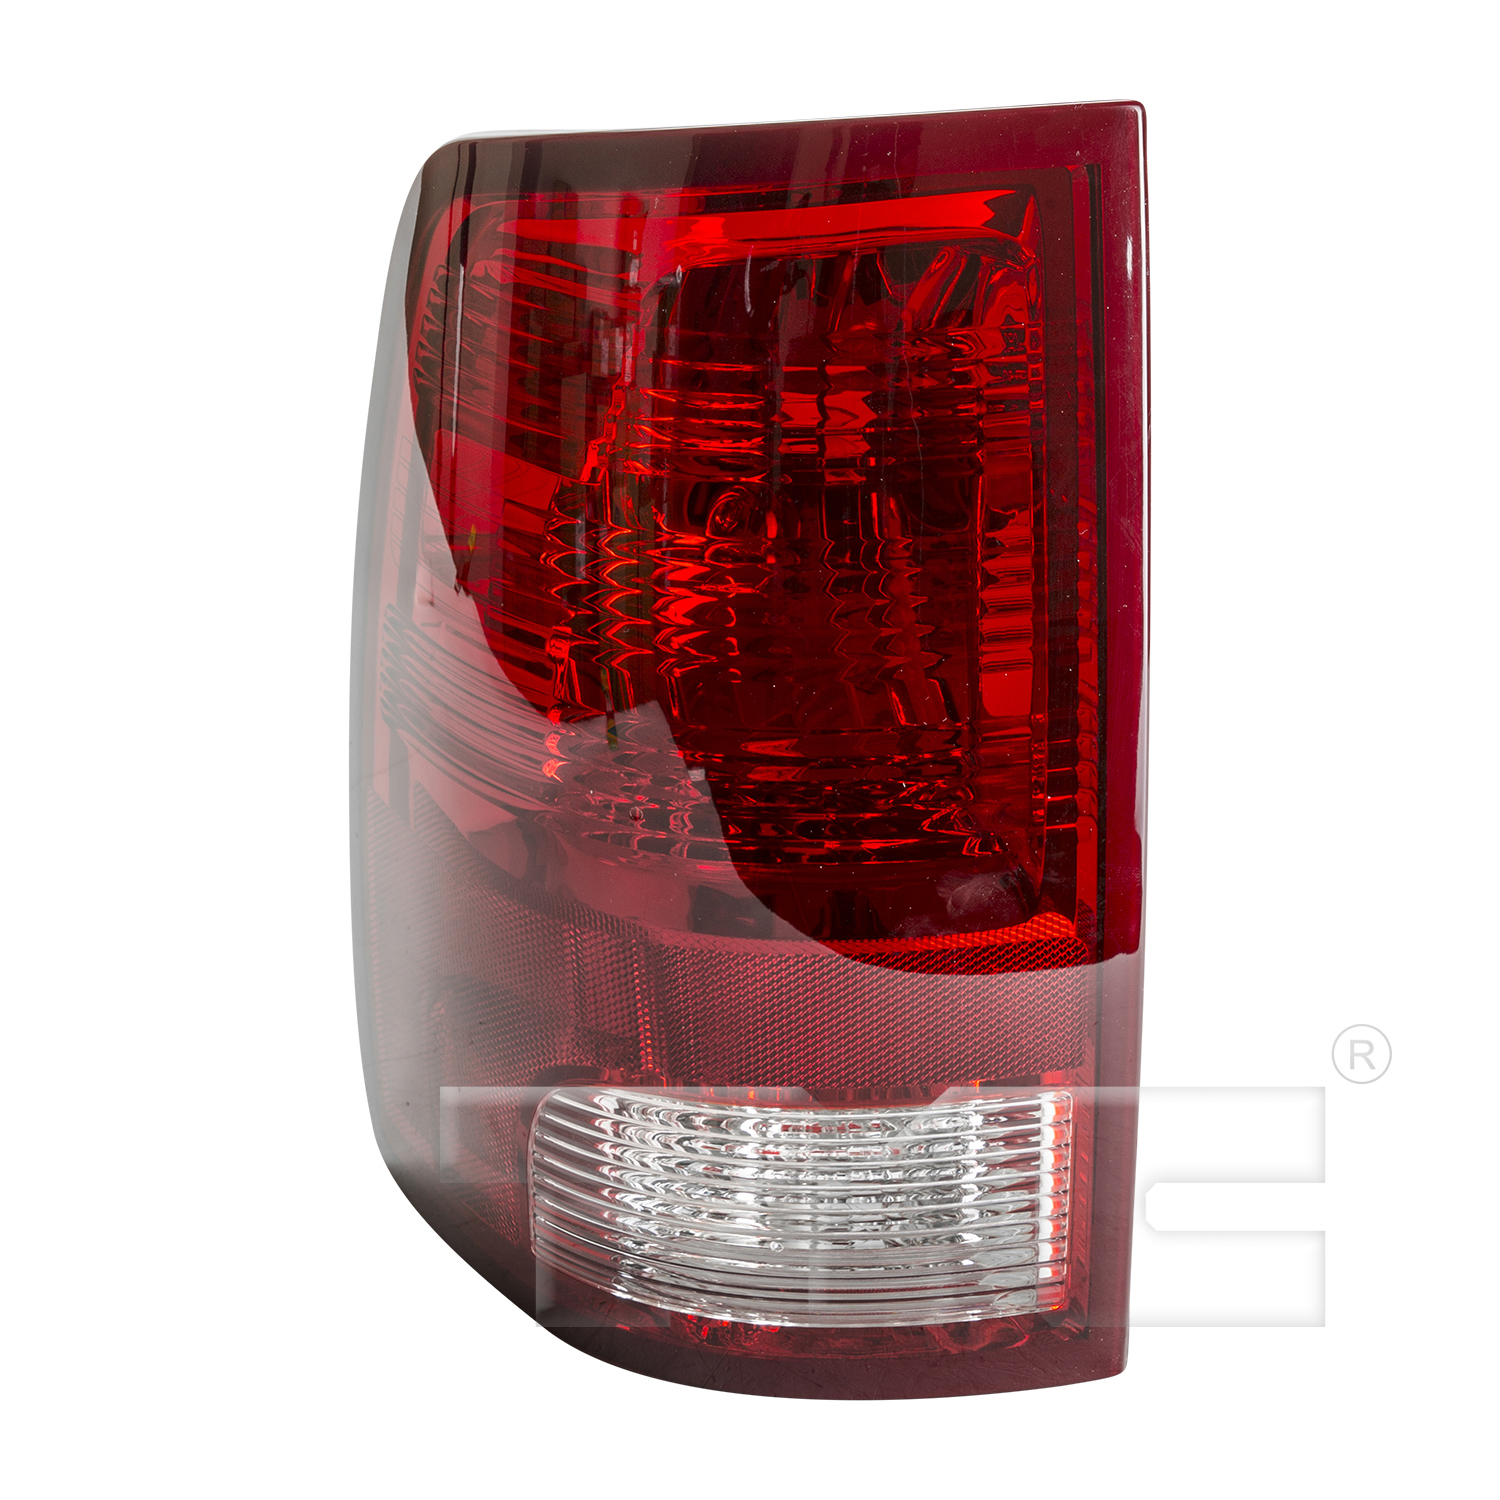 Aftermarket TAILLIGHTS for RAM - 1500 CLASSIC, 1500 CLASSIC,19-24,LT Taillamp lens/housing